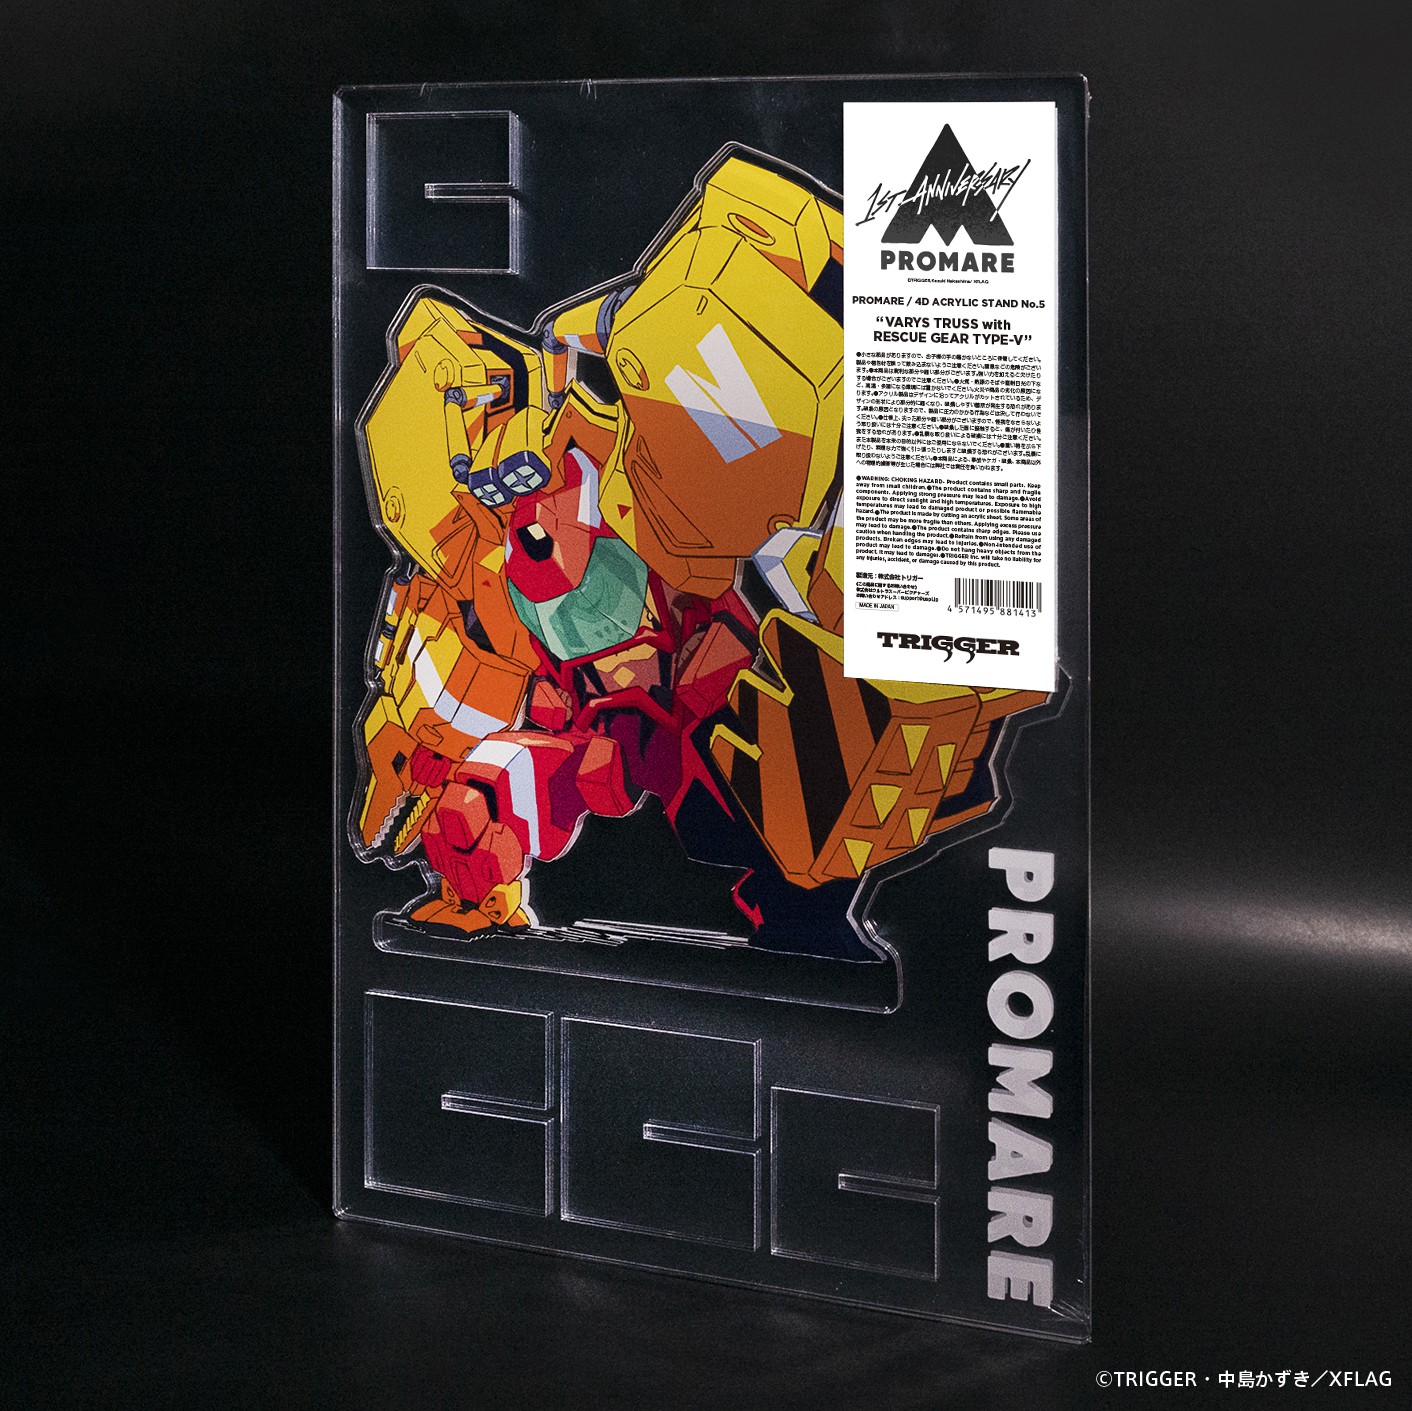 PROMARE / 4D ACRYLIC STAND No.5 "VARYS TRUSS with RESCUE GEAR TYPE-V"